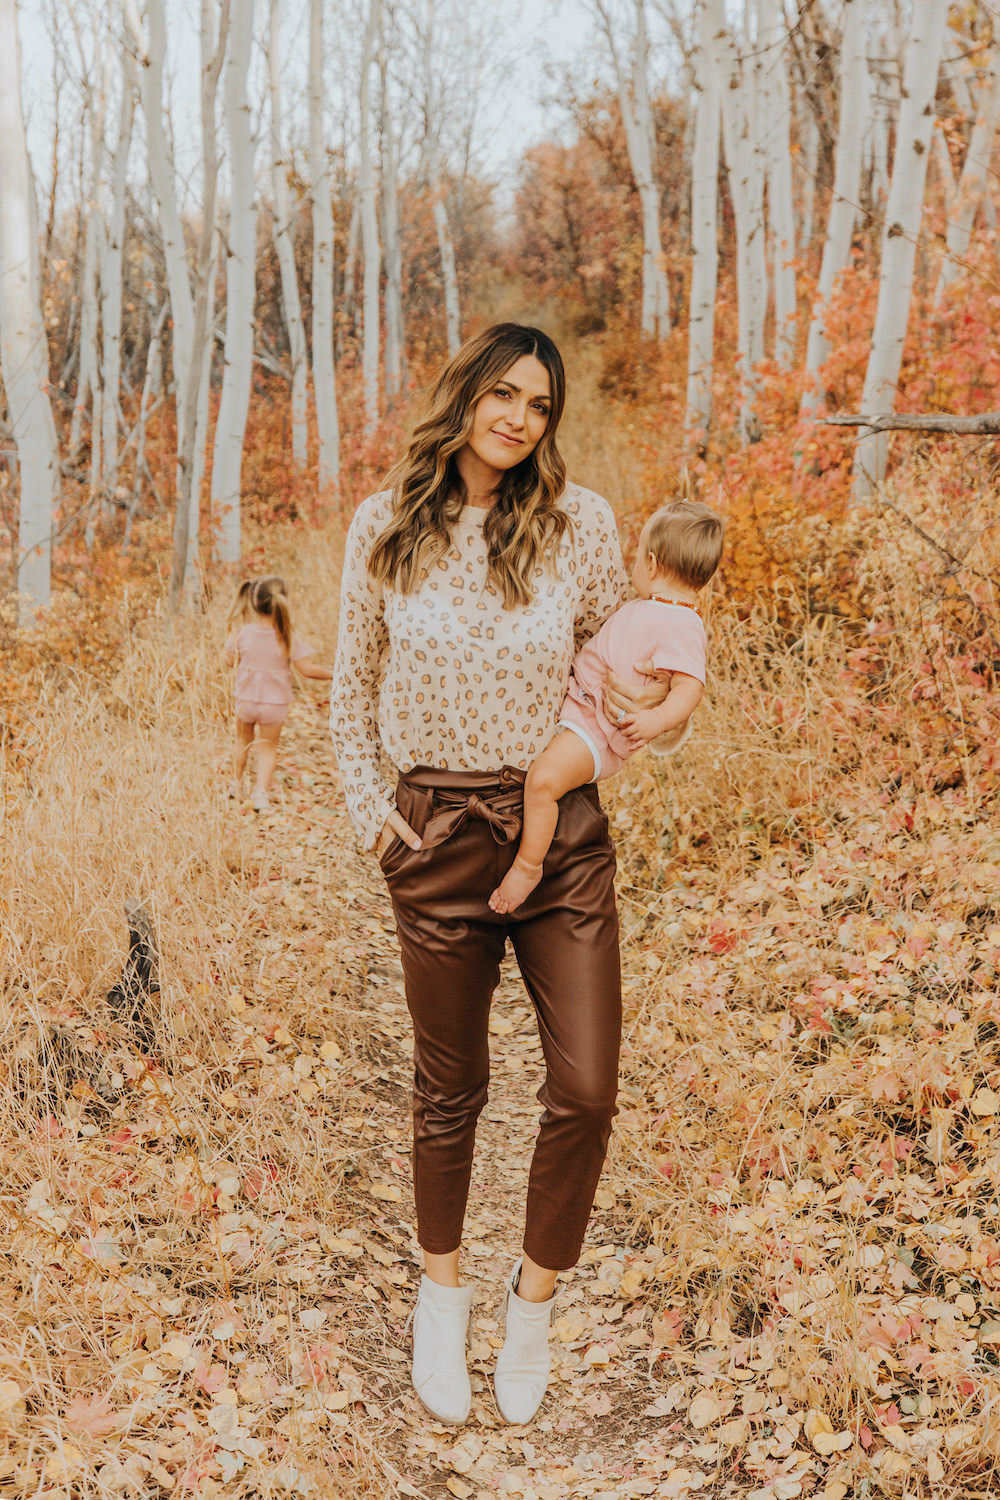 Brown Leather Pants Make for The Perfect Fall Outfit